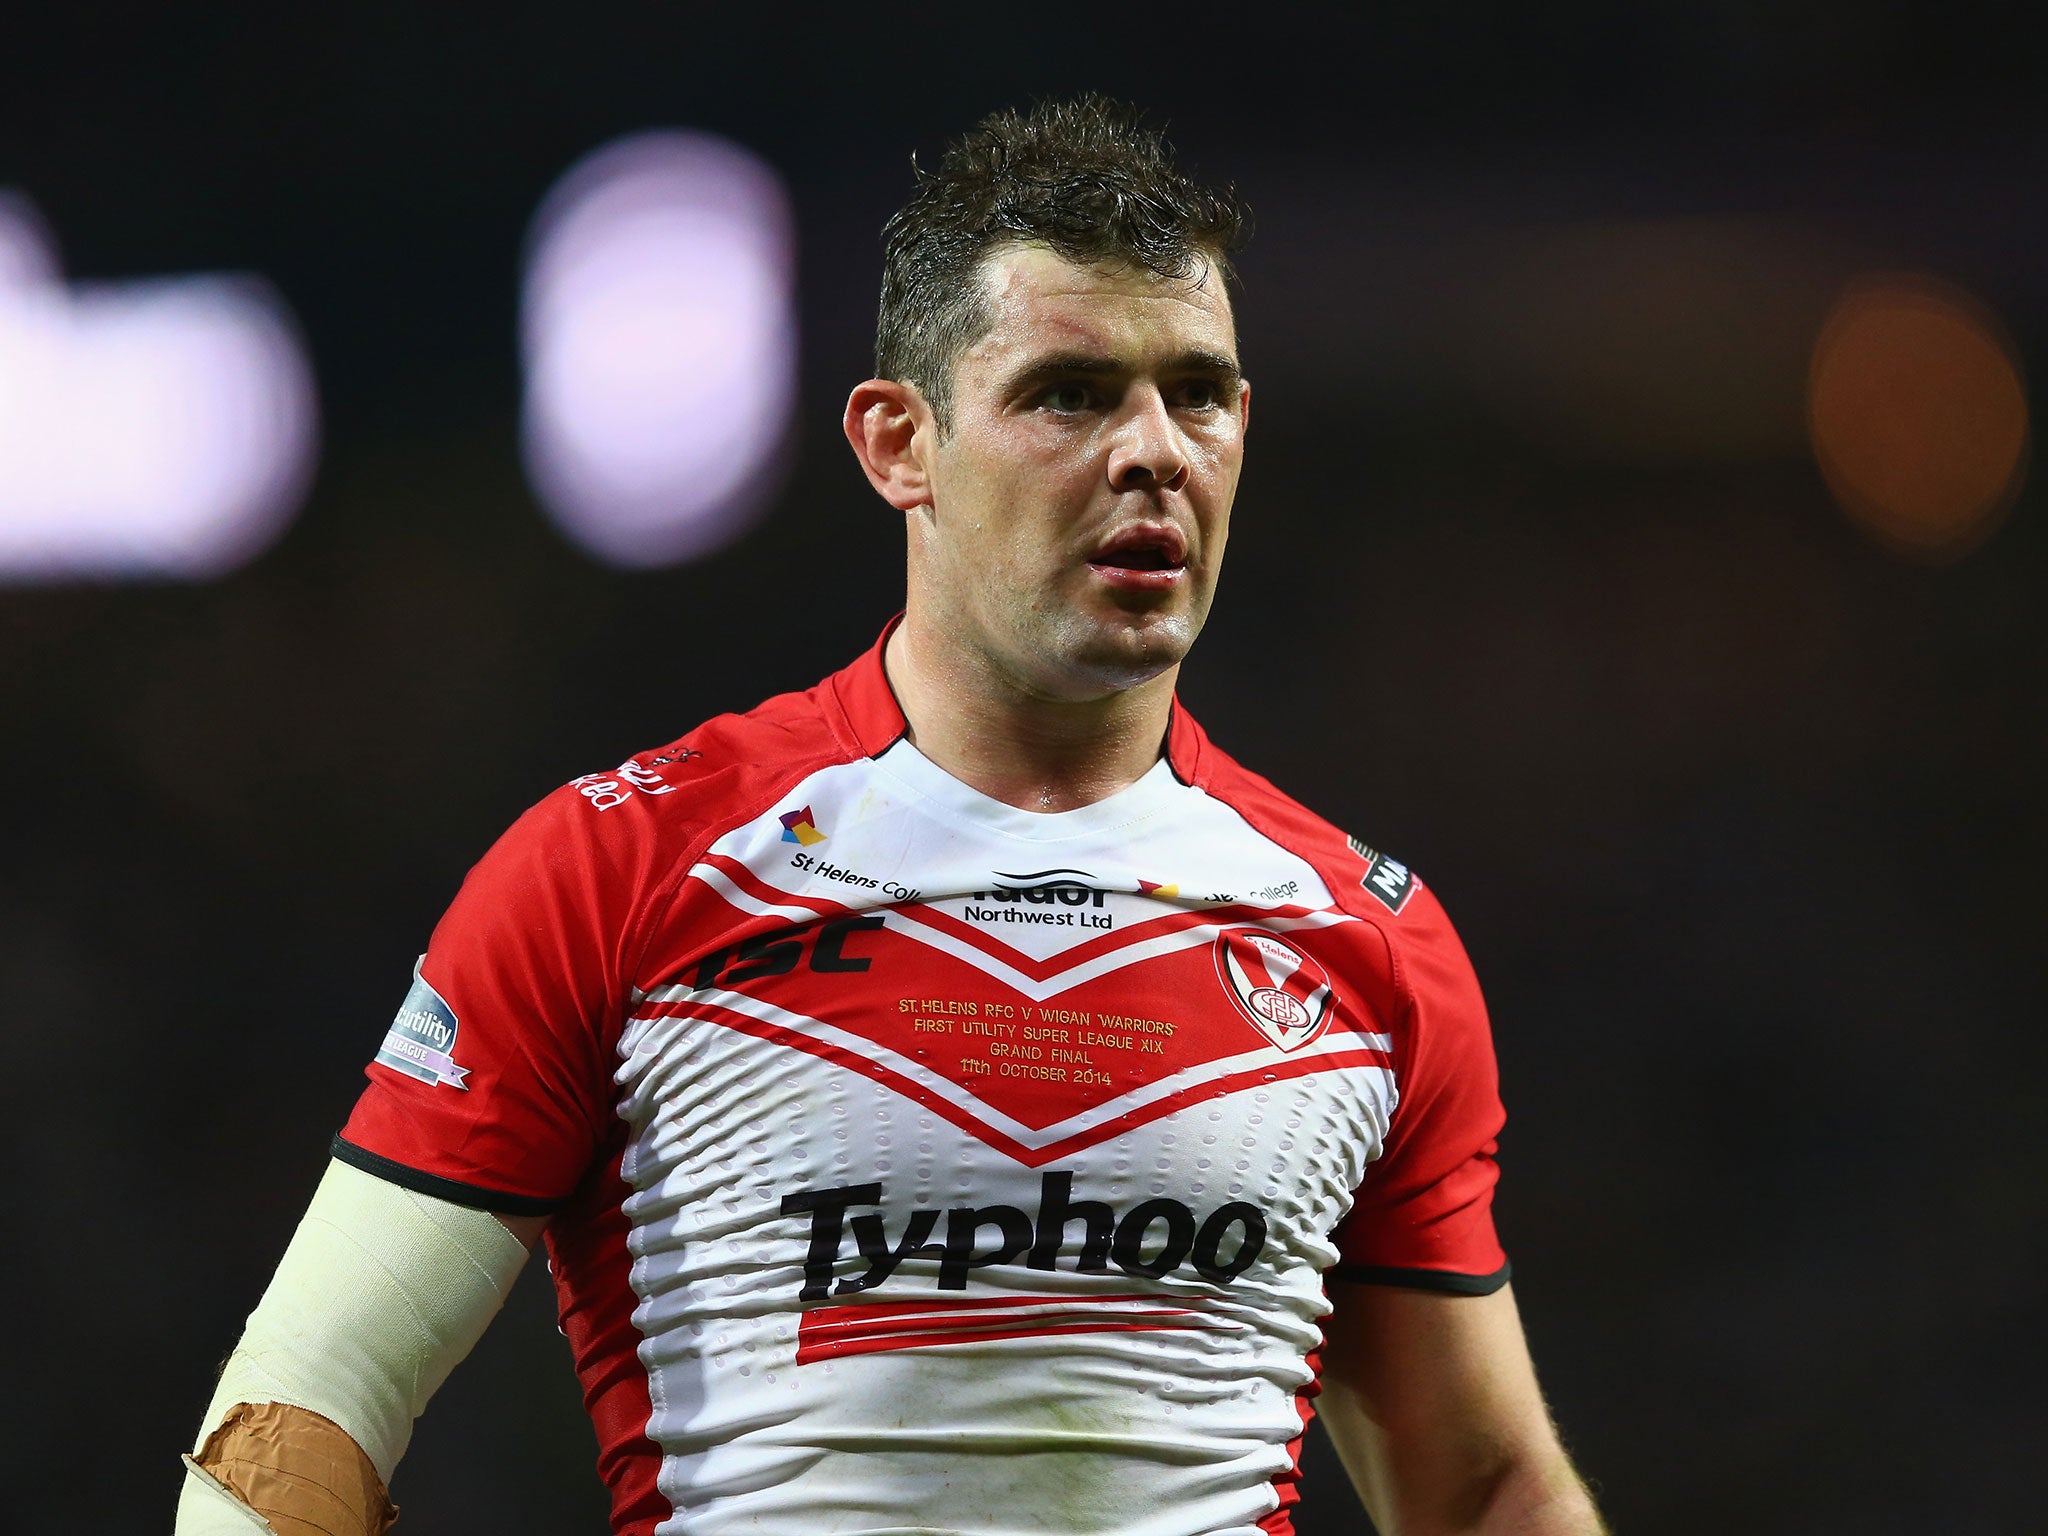 Paul Wellens has retired due to injury at the age of 35